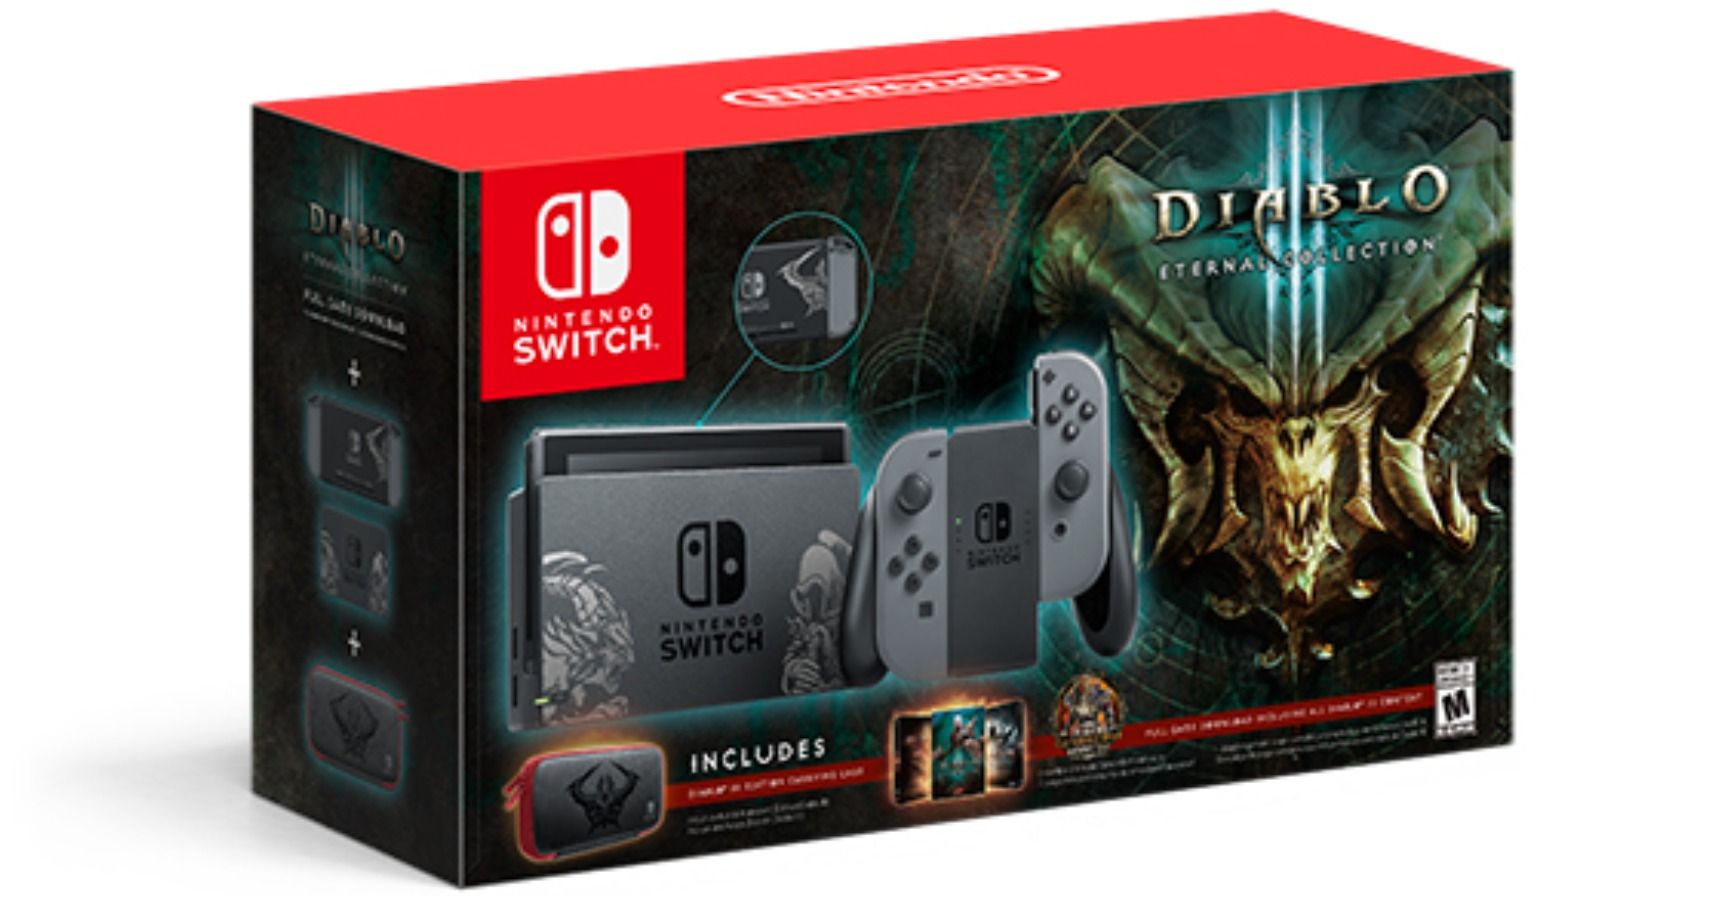 is release date of diablo 3 switch the same on amazon